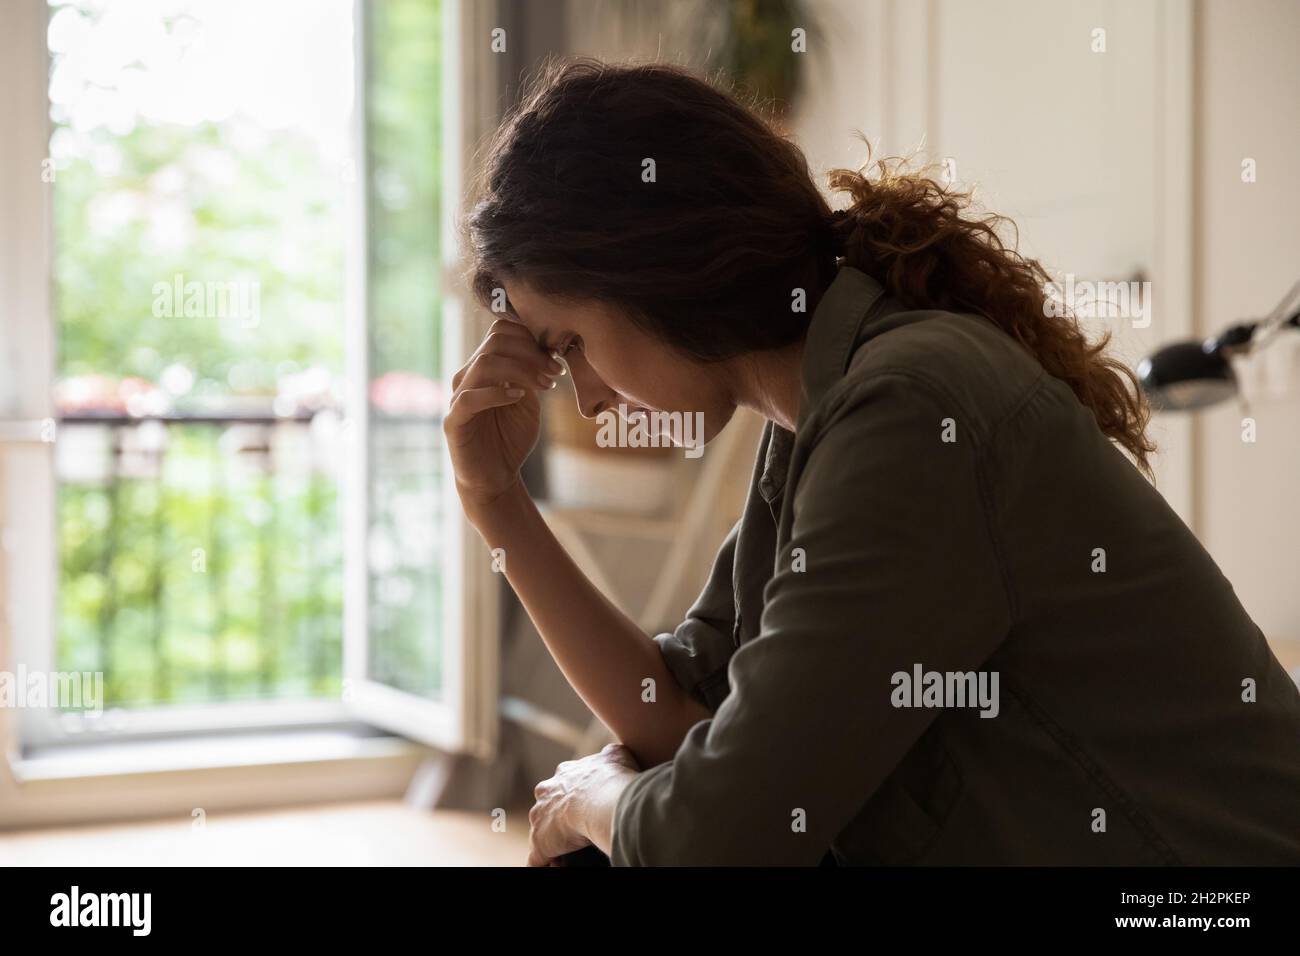 Worried frustrated young woman feeling depressed and lonely Stock Photo